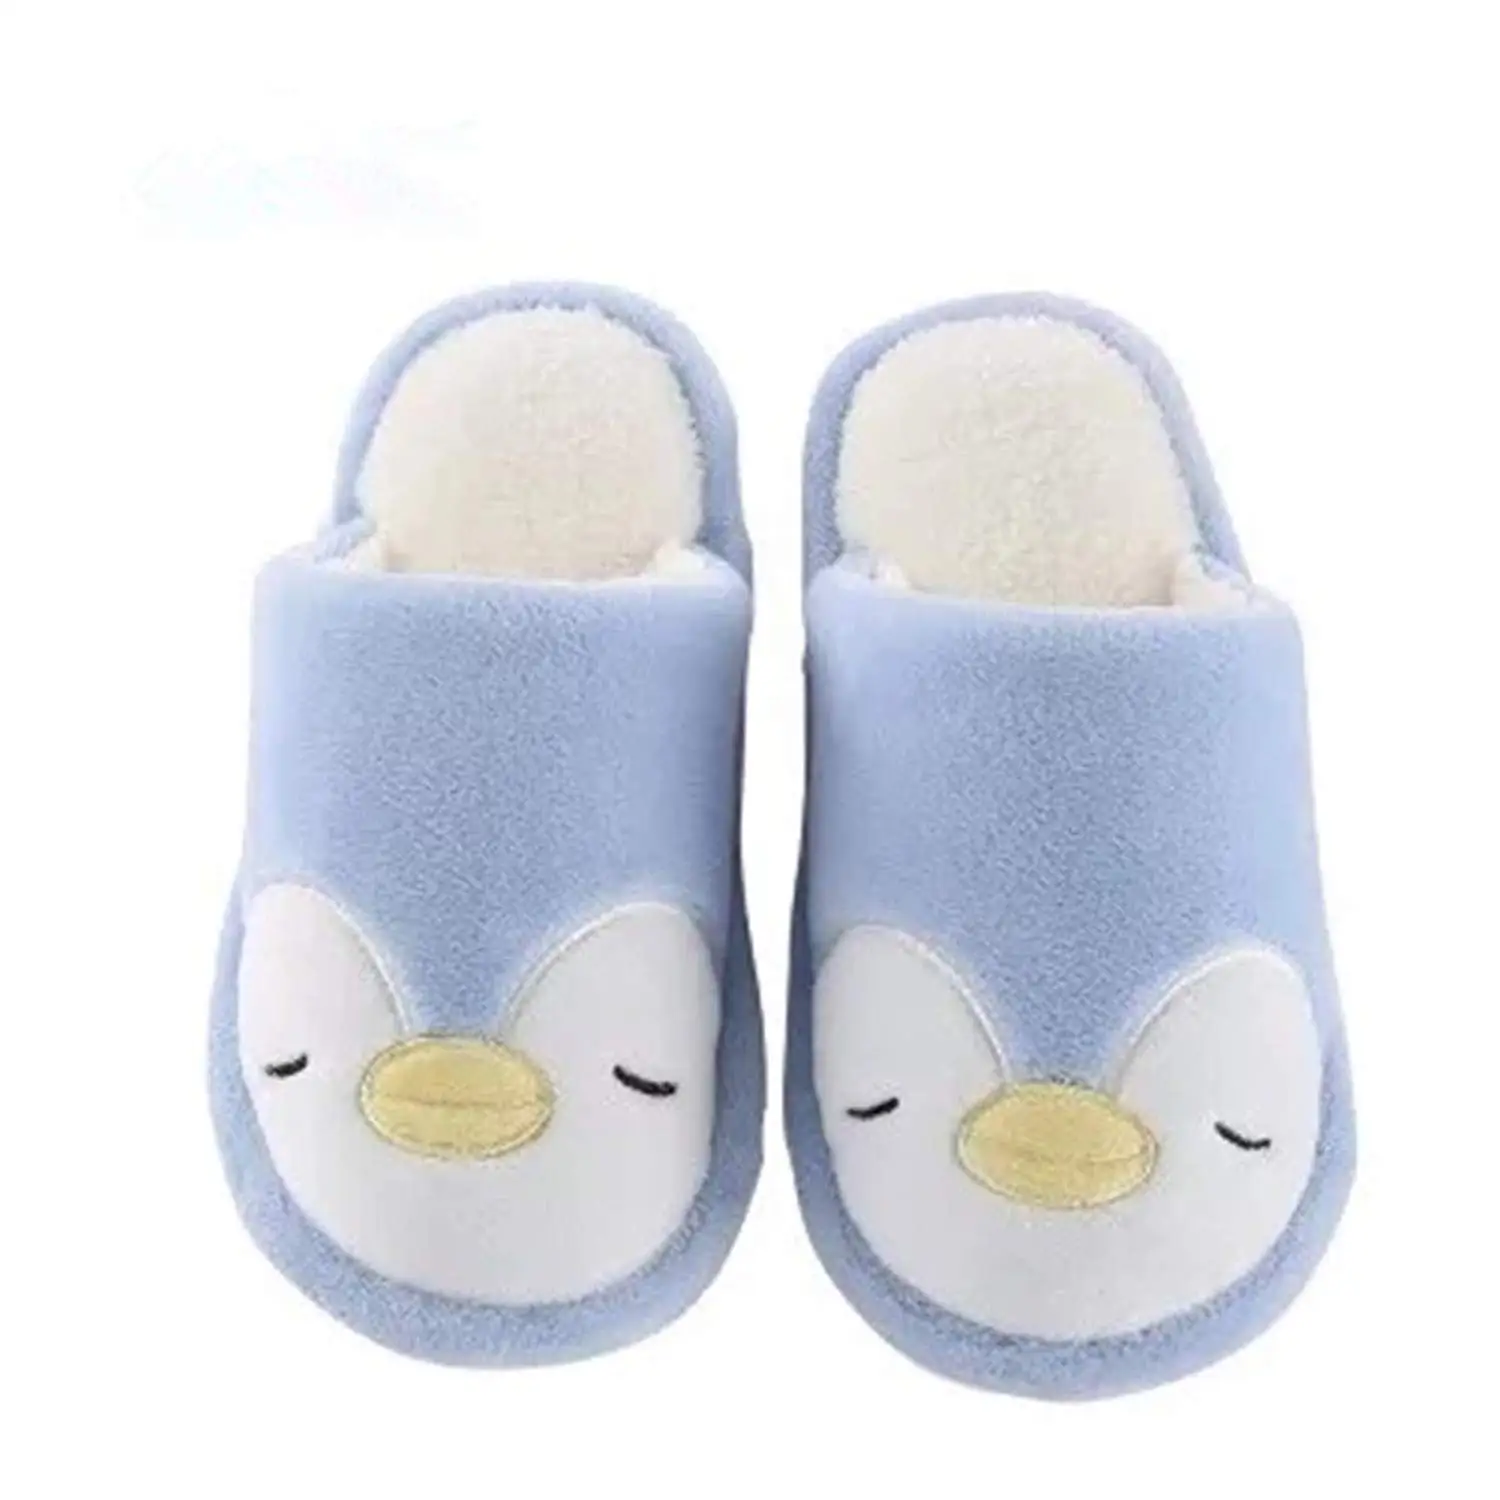 4 year old slippers